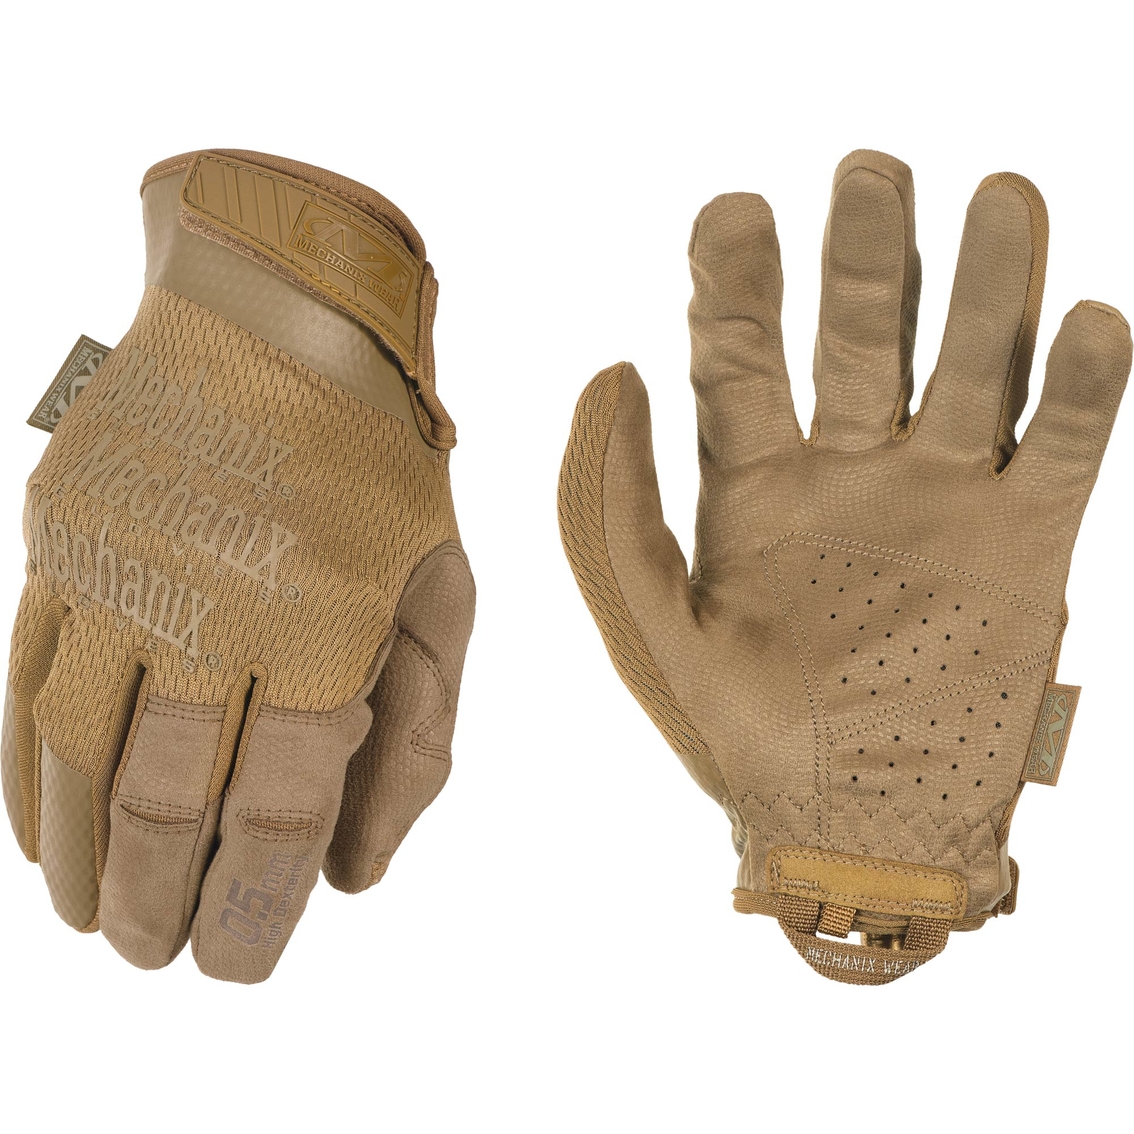 Mechanix Wear Specialty 0.5mm Coyote Tactical Shooting Gloves